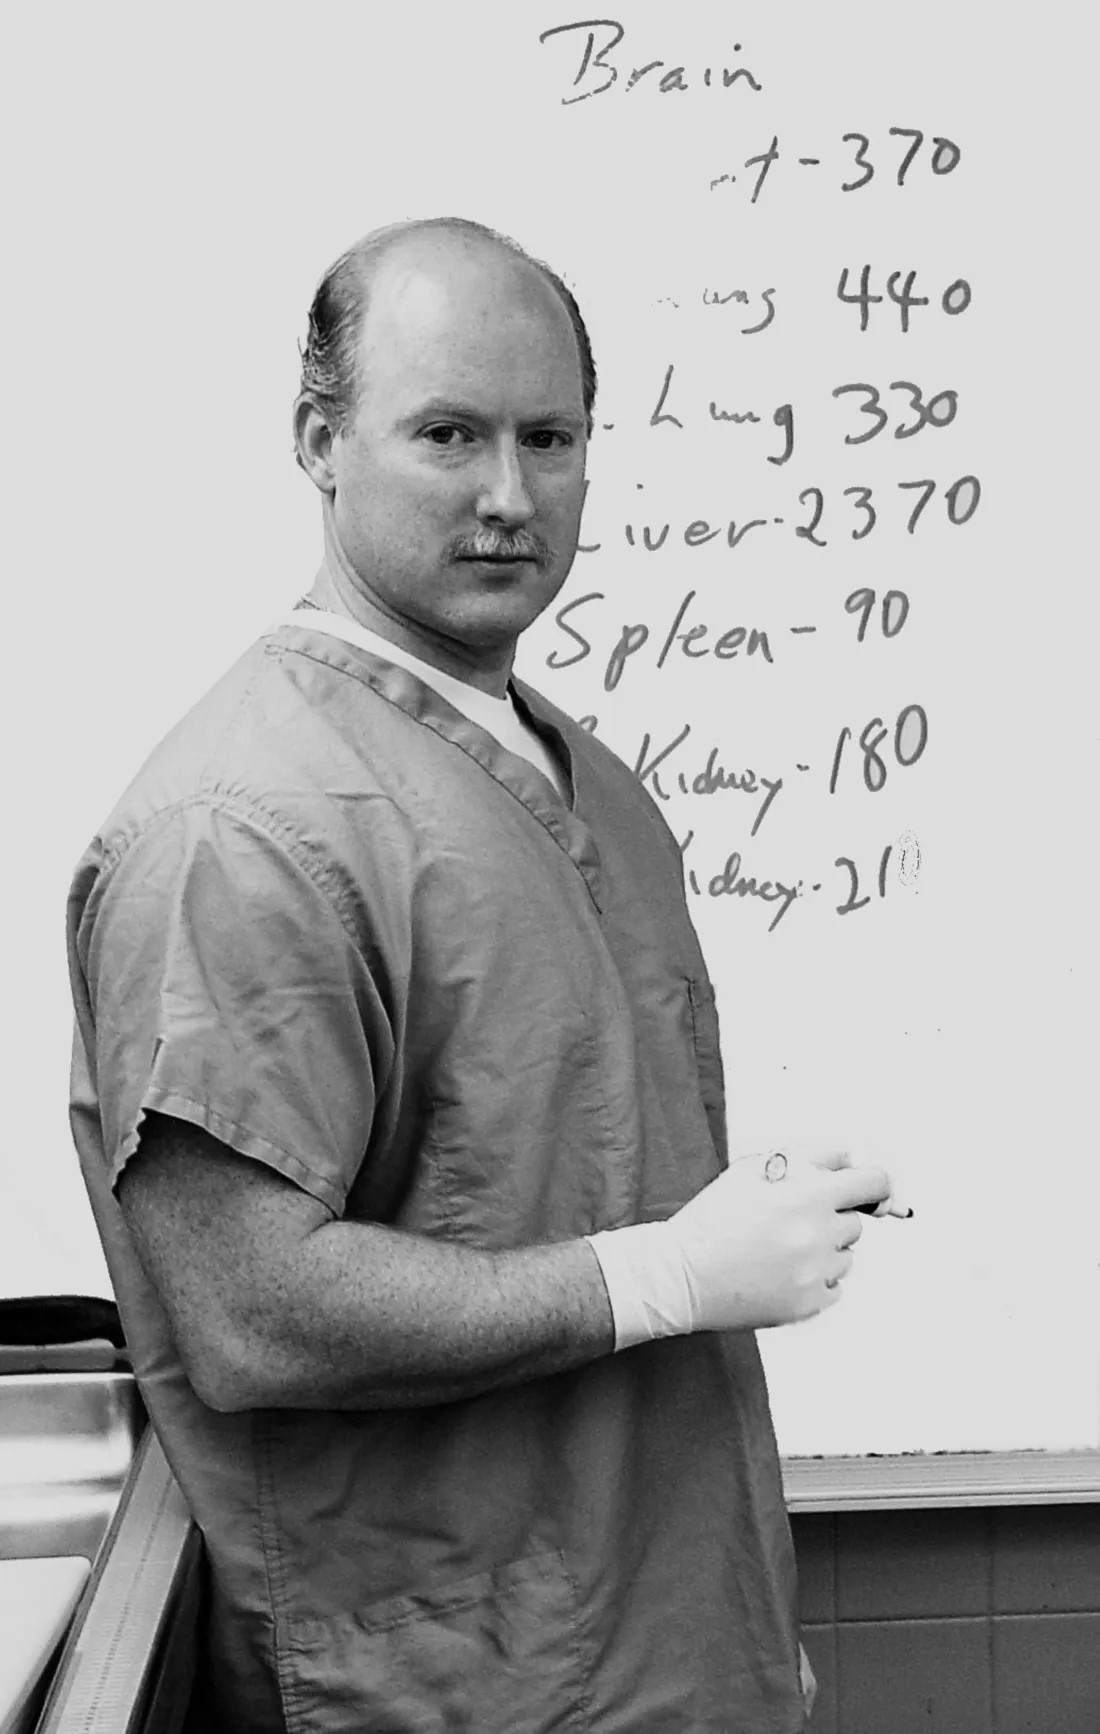 Black and white of author Tobin Buhk dressed in scrubs and wearing rubber gloves, writing on a dry erase board.